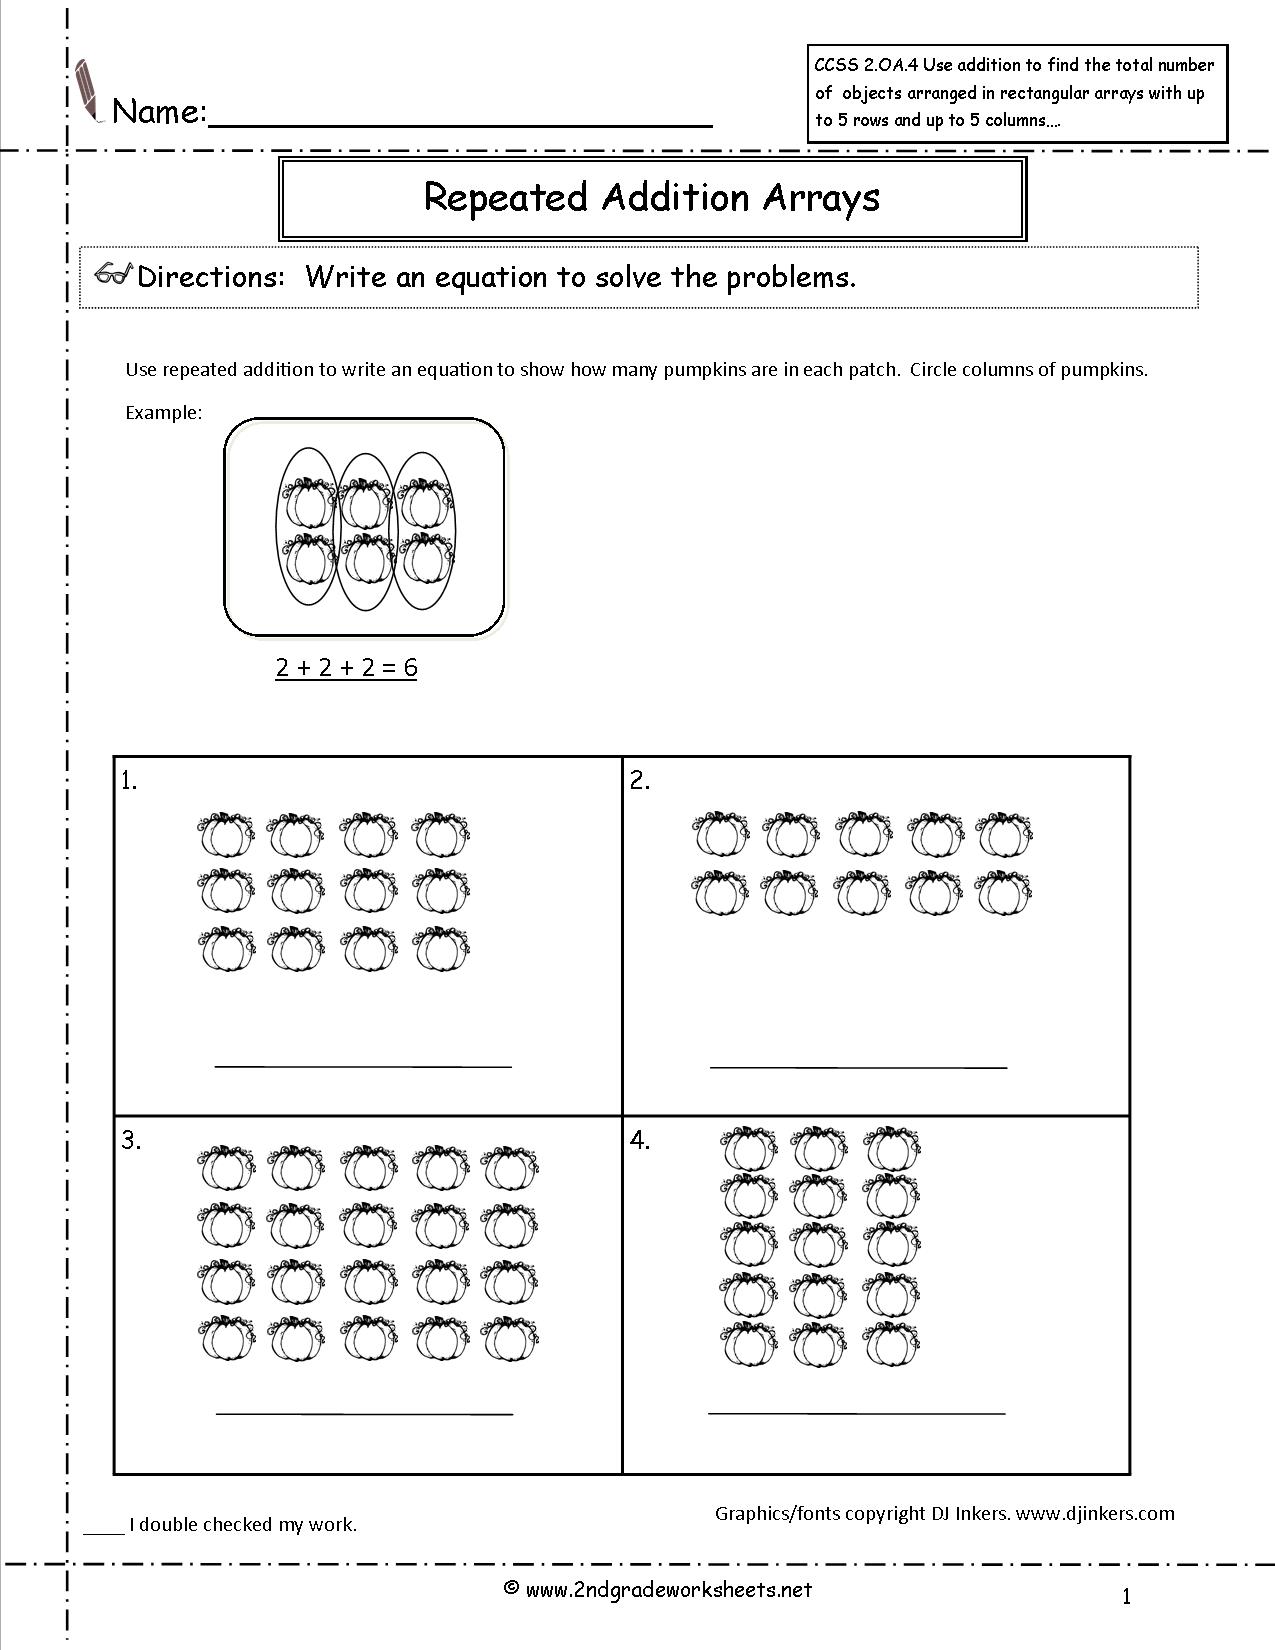 Repeated Addition Arrays Worksheets Image